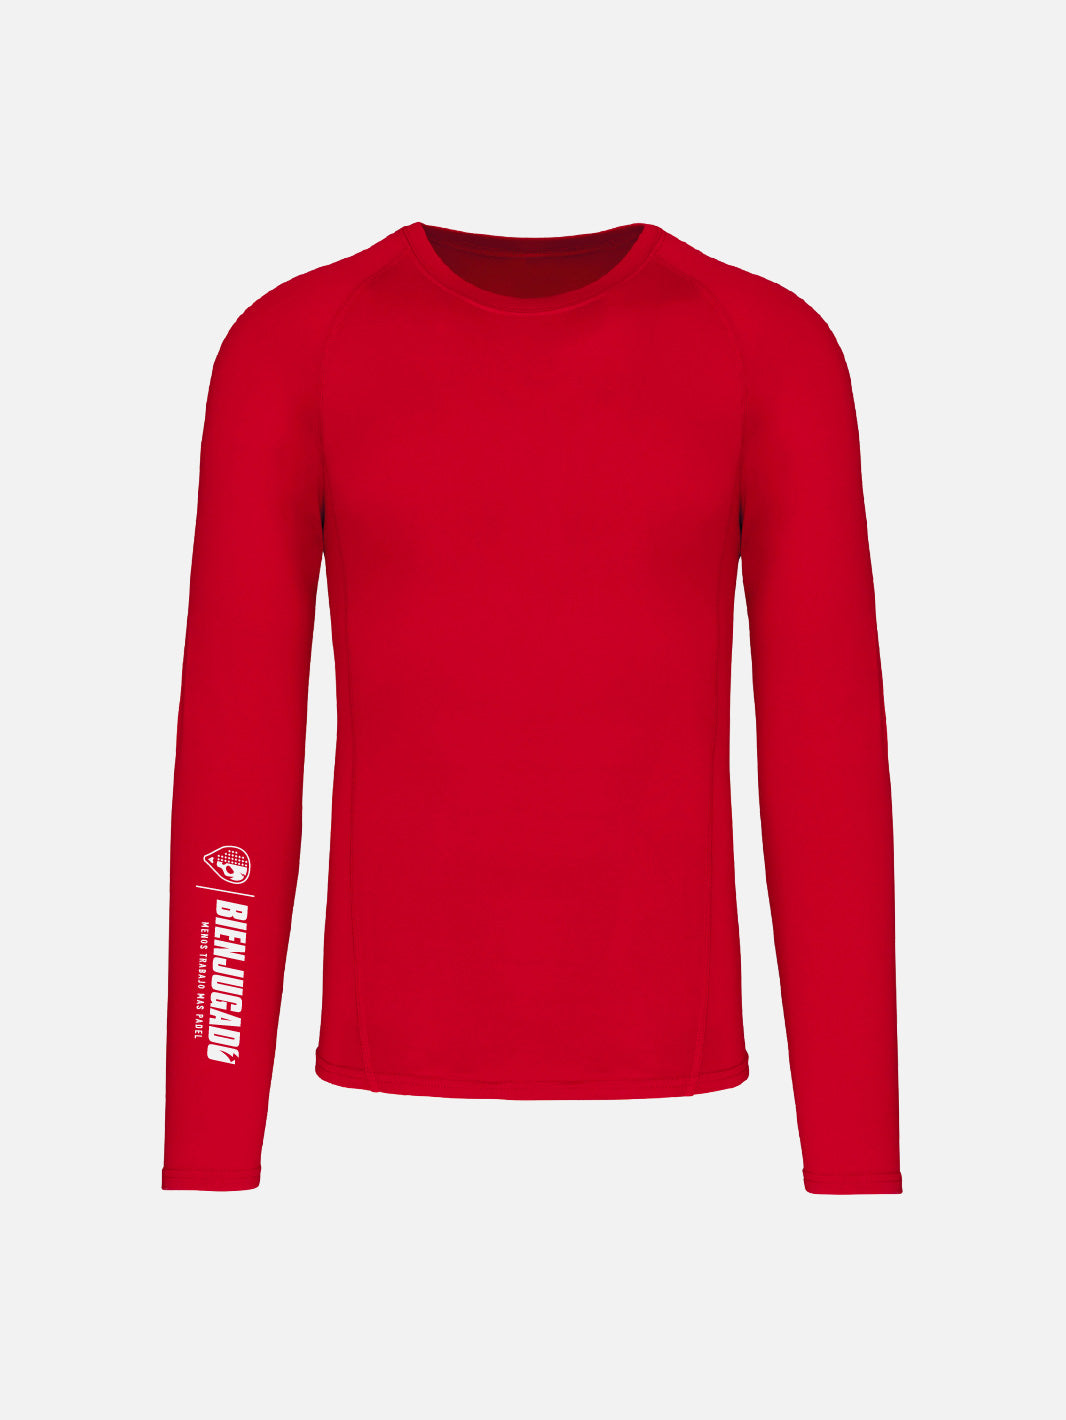 Unisex Thermal Shirt - Red